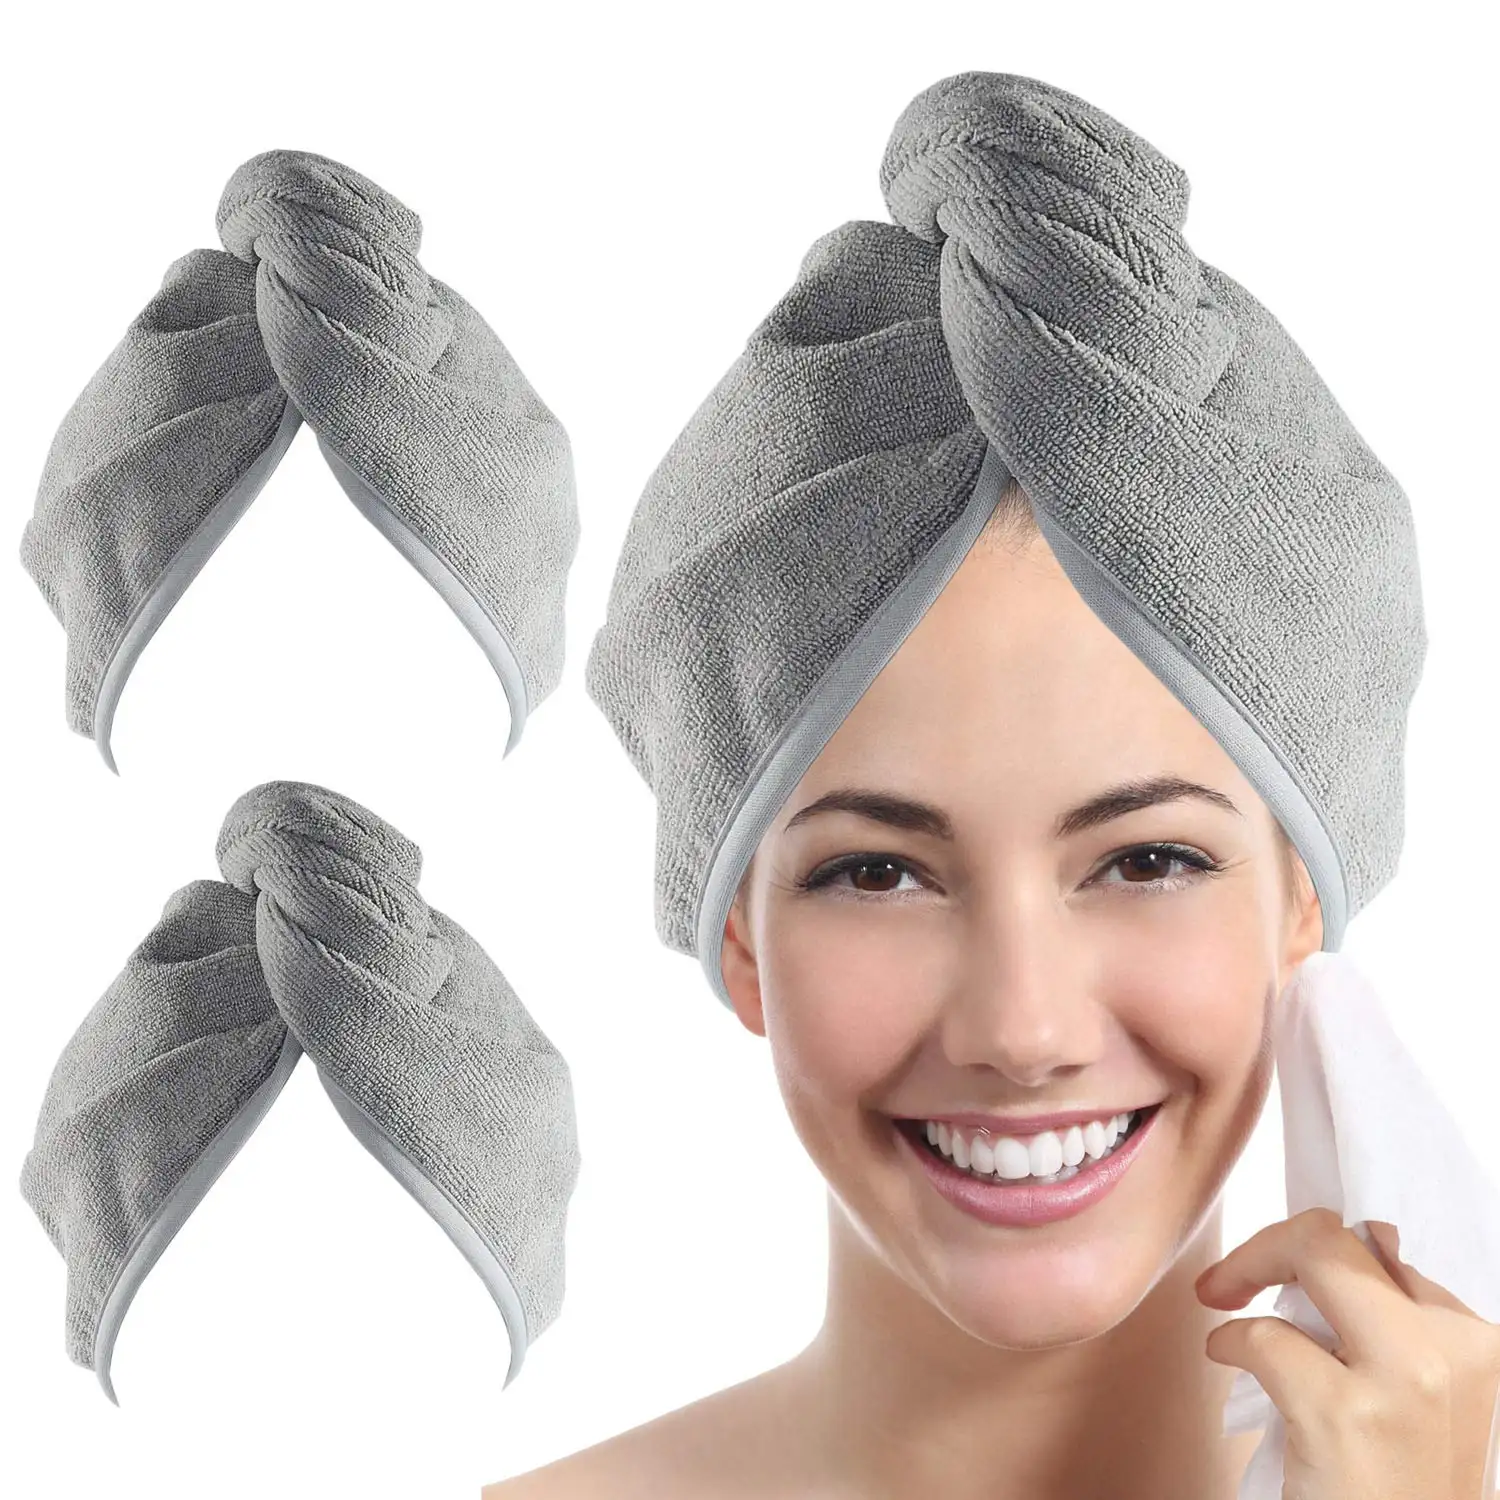 Super Absorbent Quick Dry Hair Turban for Women 2 Pack 10 inch X 26 inch Spa Bathing Microfiber Hair Drying Towel Wrap